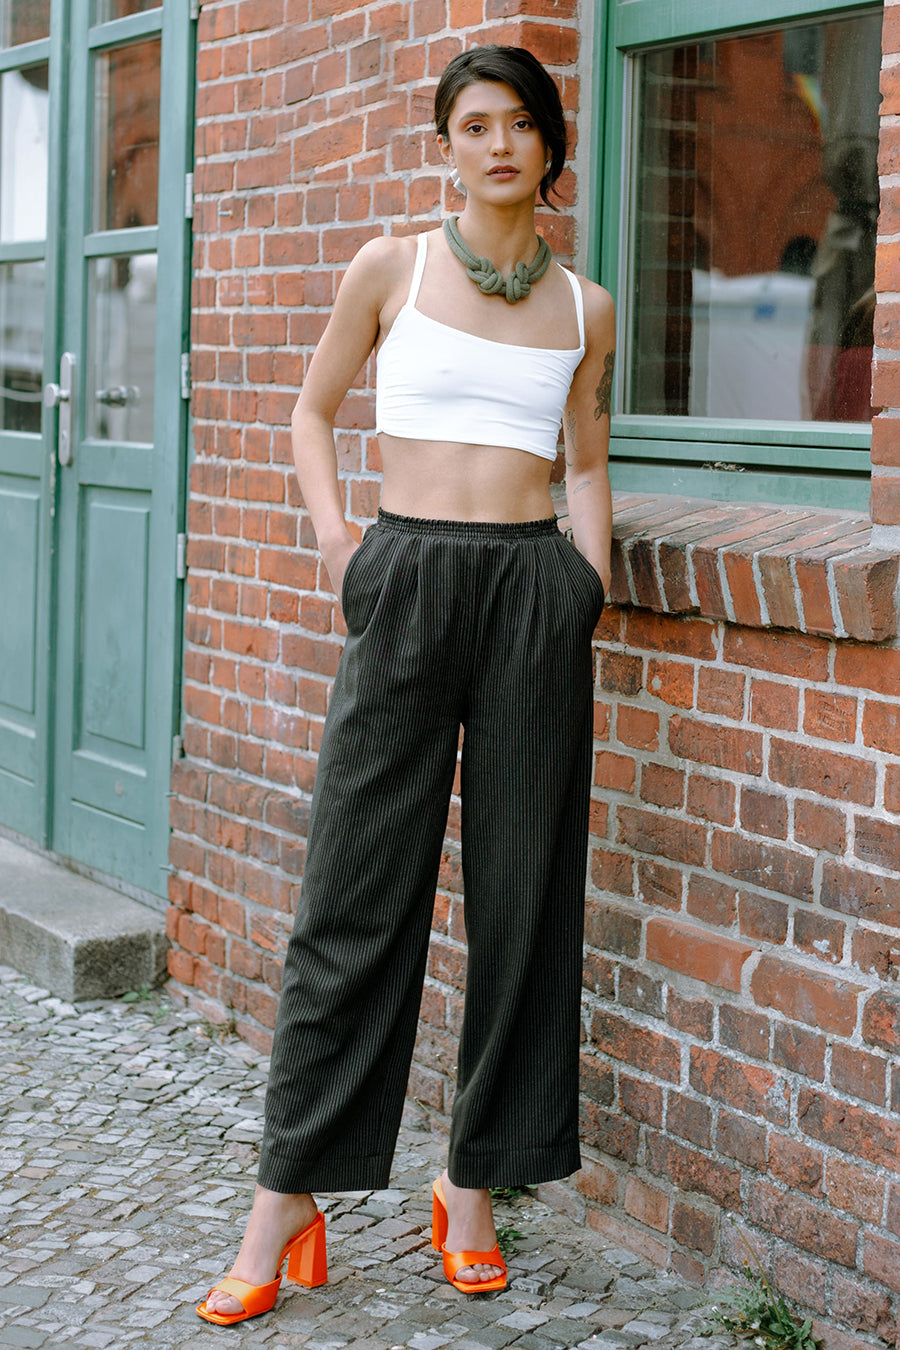 Woman wearing the Leslie Pants sewing pattern from JULIANA MARTEJEVS on The Fold Line. A trouser pattern made in light linen or denim, seersucker or thin virgin wool fabrics, featuring a slight cropped length, wide leg, side pockets, relaxed fit and elast